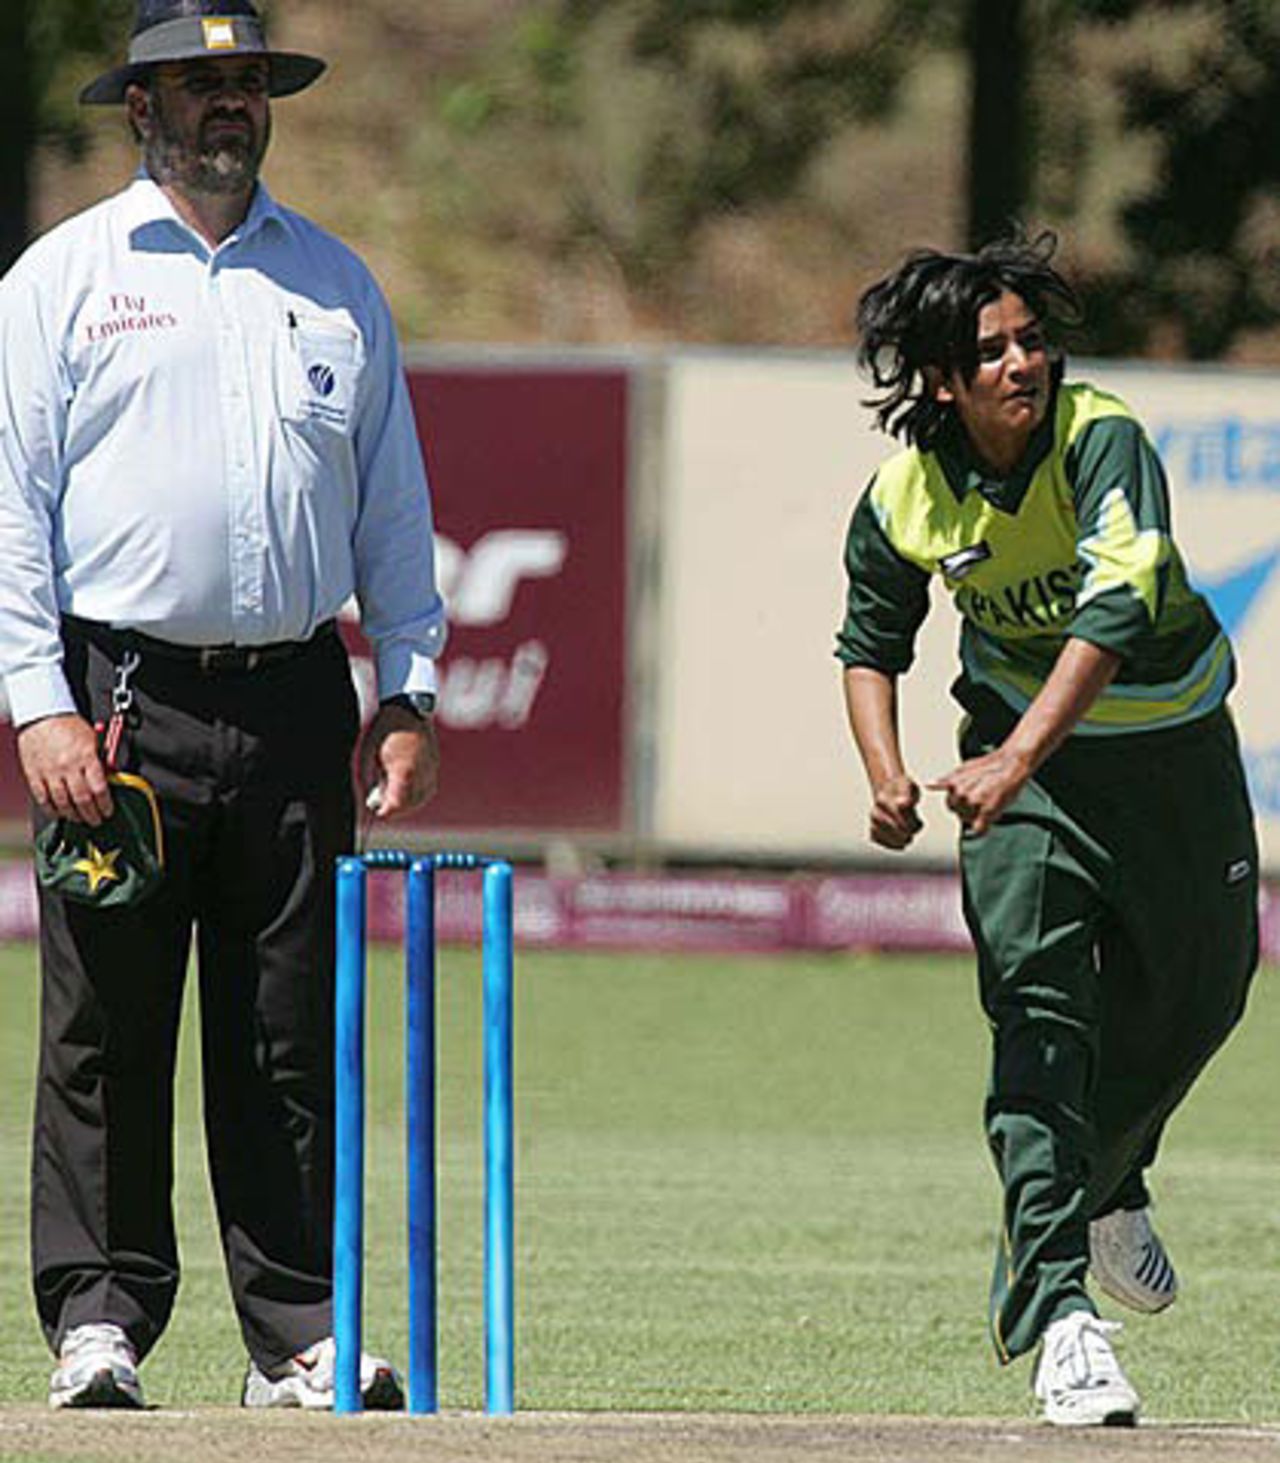 Sadia Yousuf delivers the ball, Pakistan v Zimbabwe, ICC Women's World Cup Qualifier, Stellenbosch, February 19, 2008